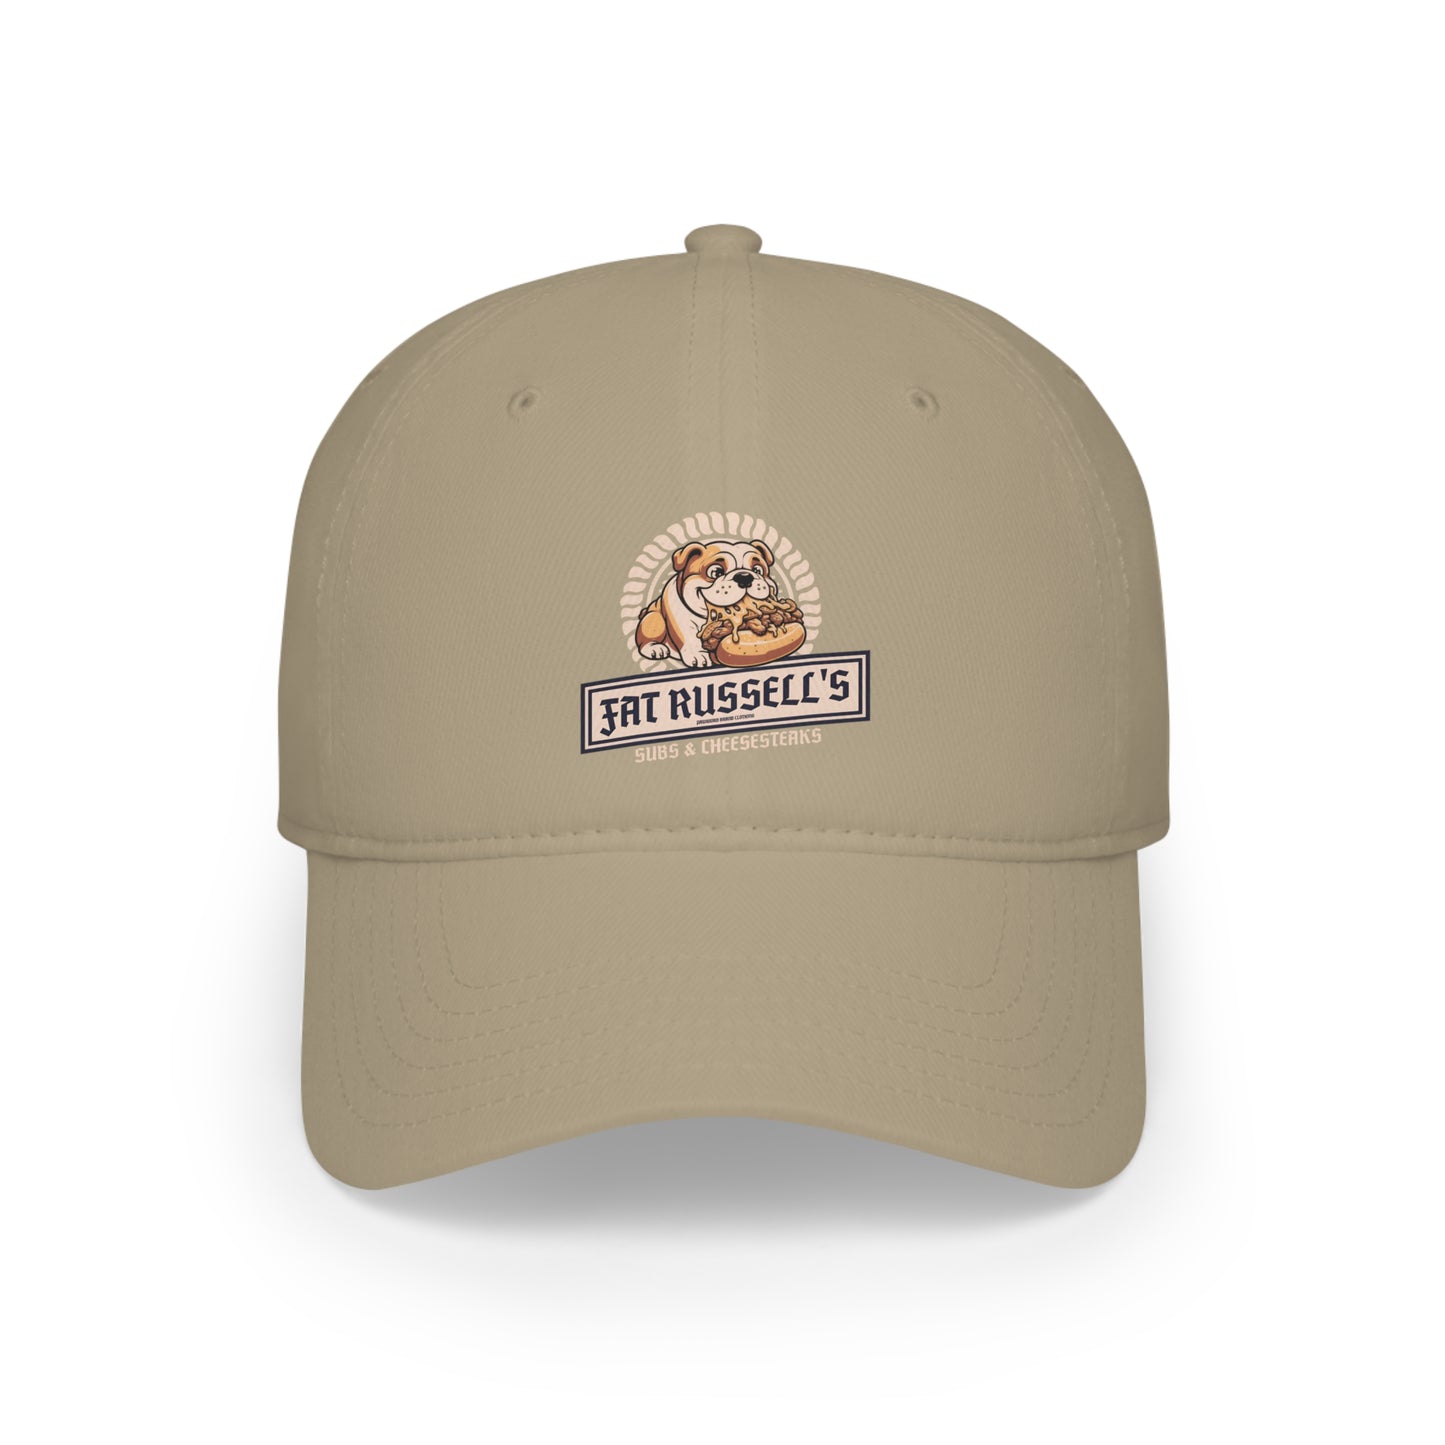 Fat Russell's Subs & Cheesesteaks Hat - English Bulldog - Low Profile Baseball Cap